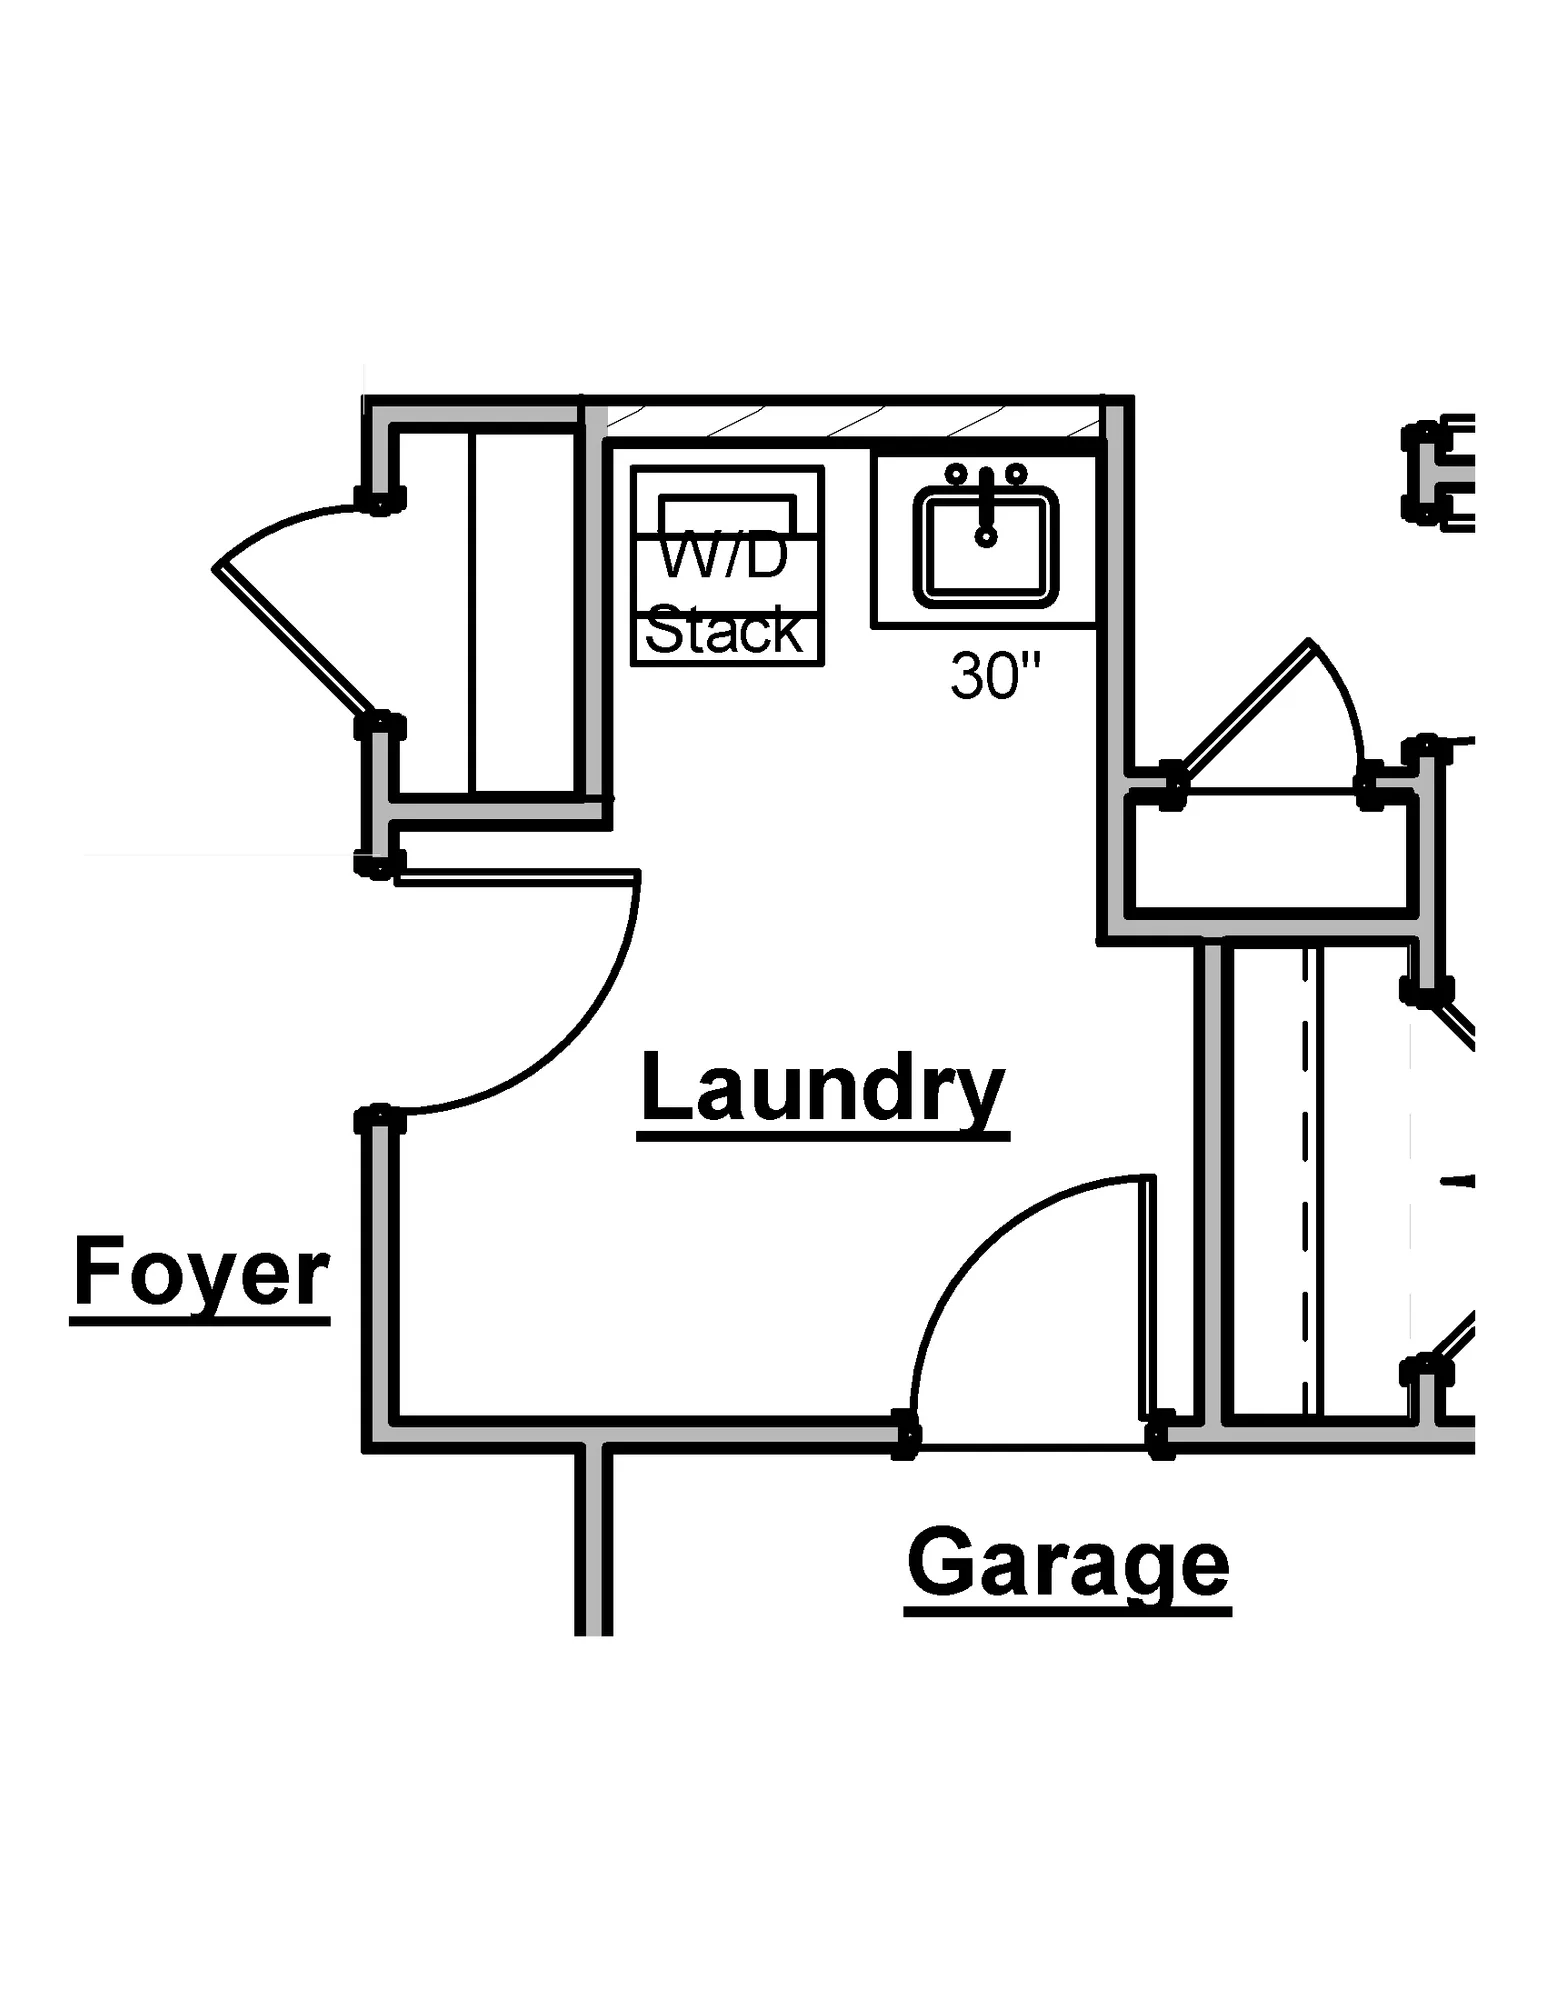 Laundry Sink - undefined